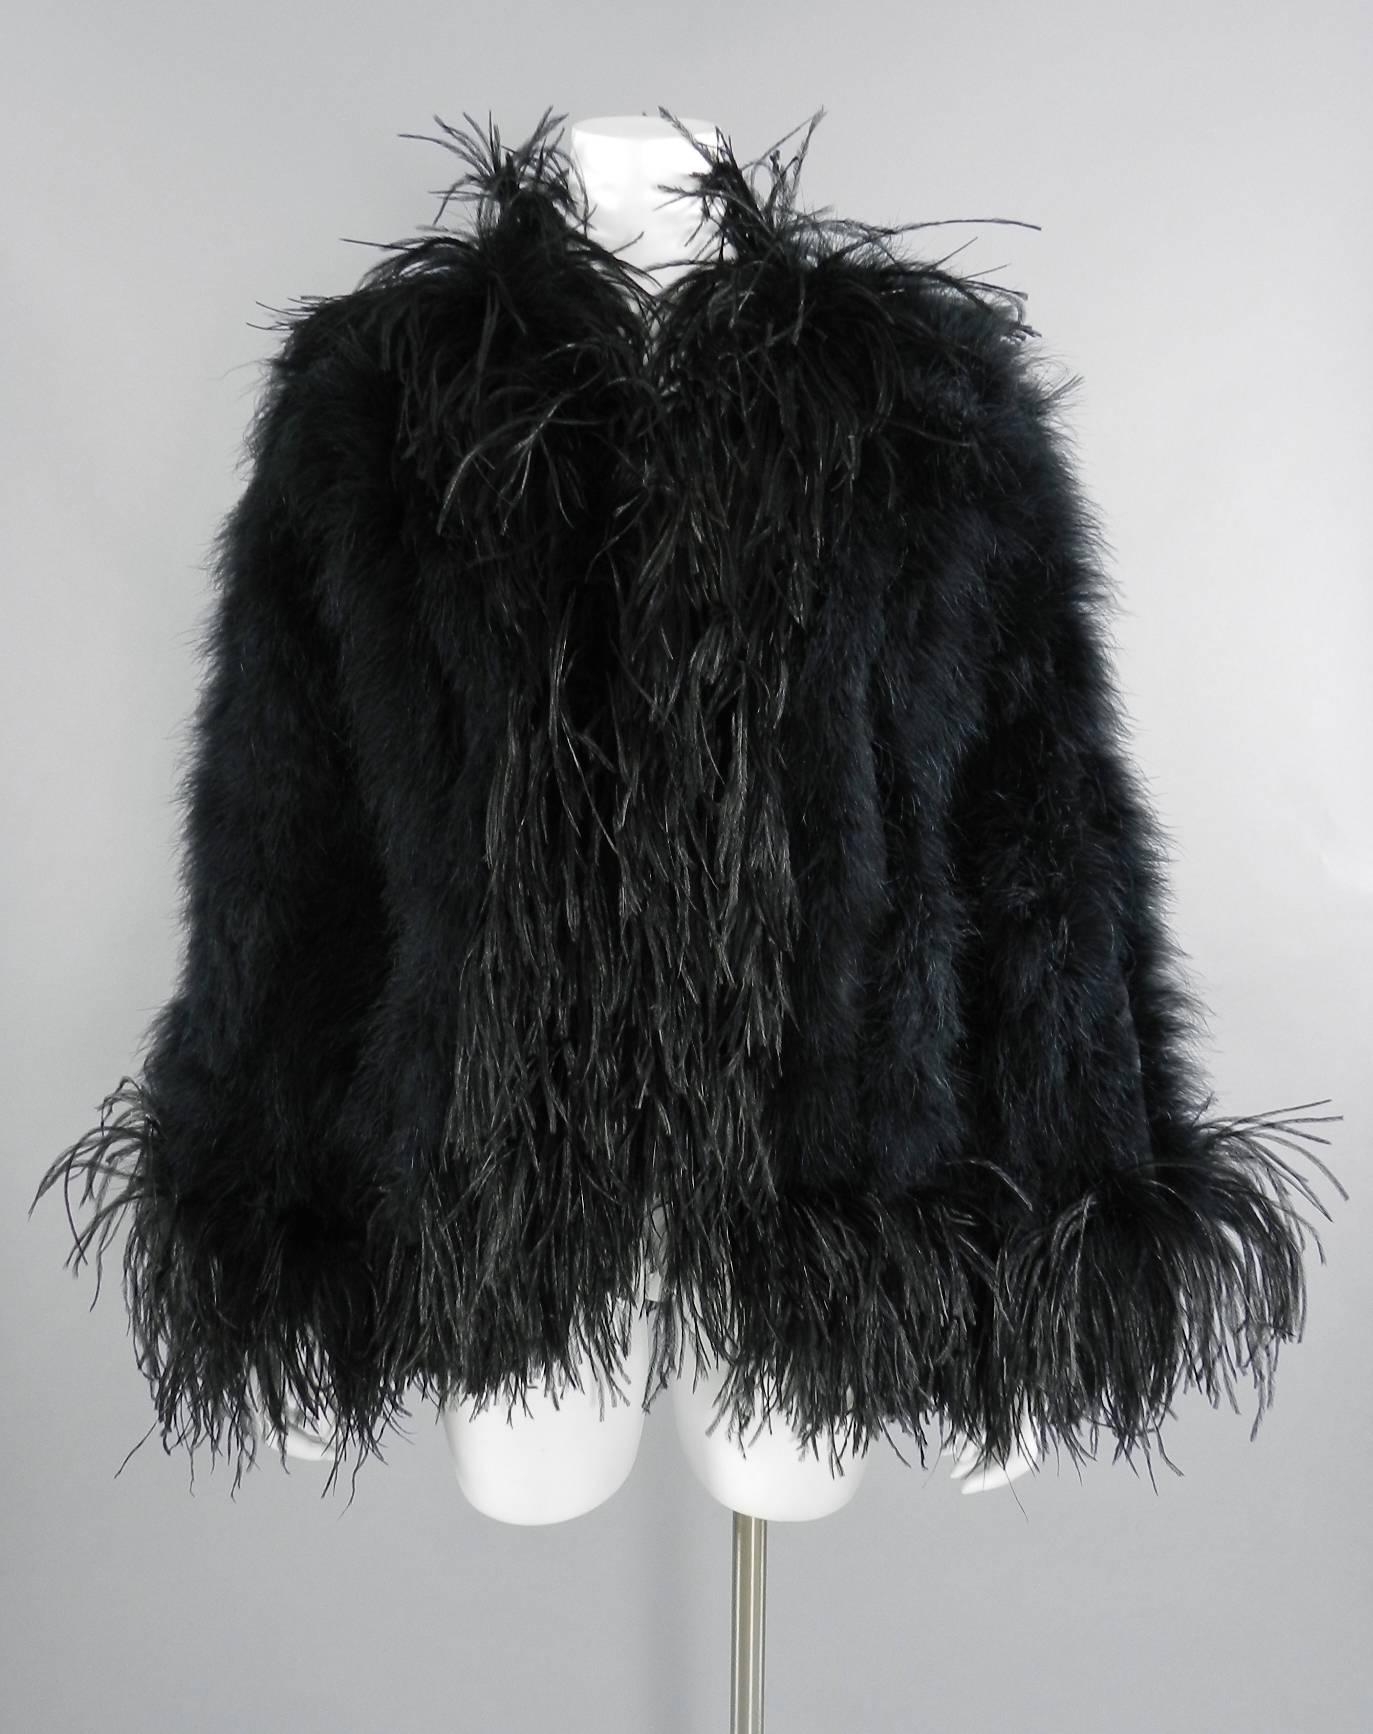 Yves Saint Laurent Vintage 1970's Maribou and Ostrich Feather Glam Jacket.  Body is decorated with maribou feathers on a flowing acetate body and trimmed with longer ostrich plume at edges.  Jacket is a light weight evening jacket and is worn open